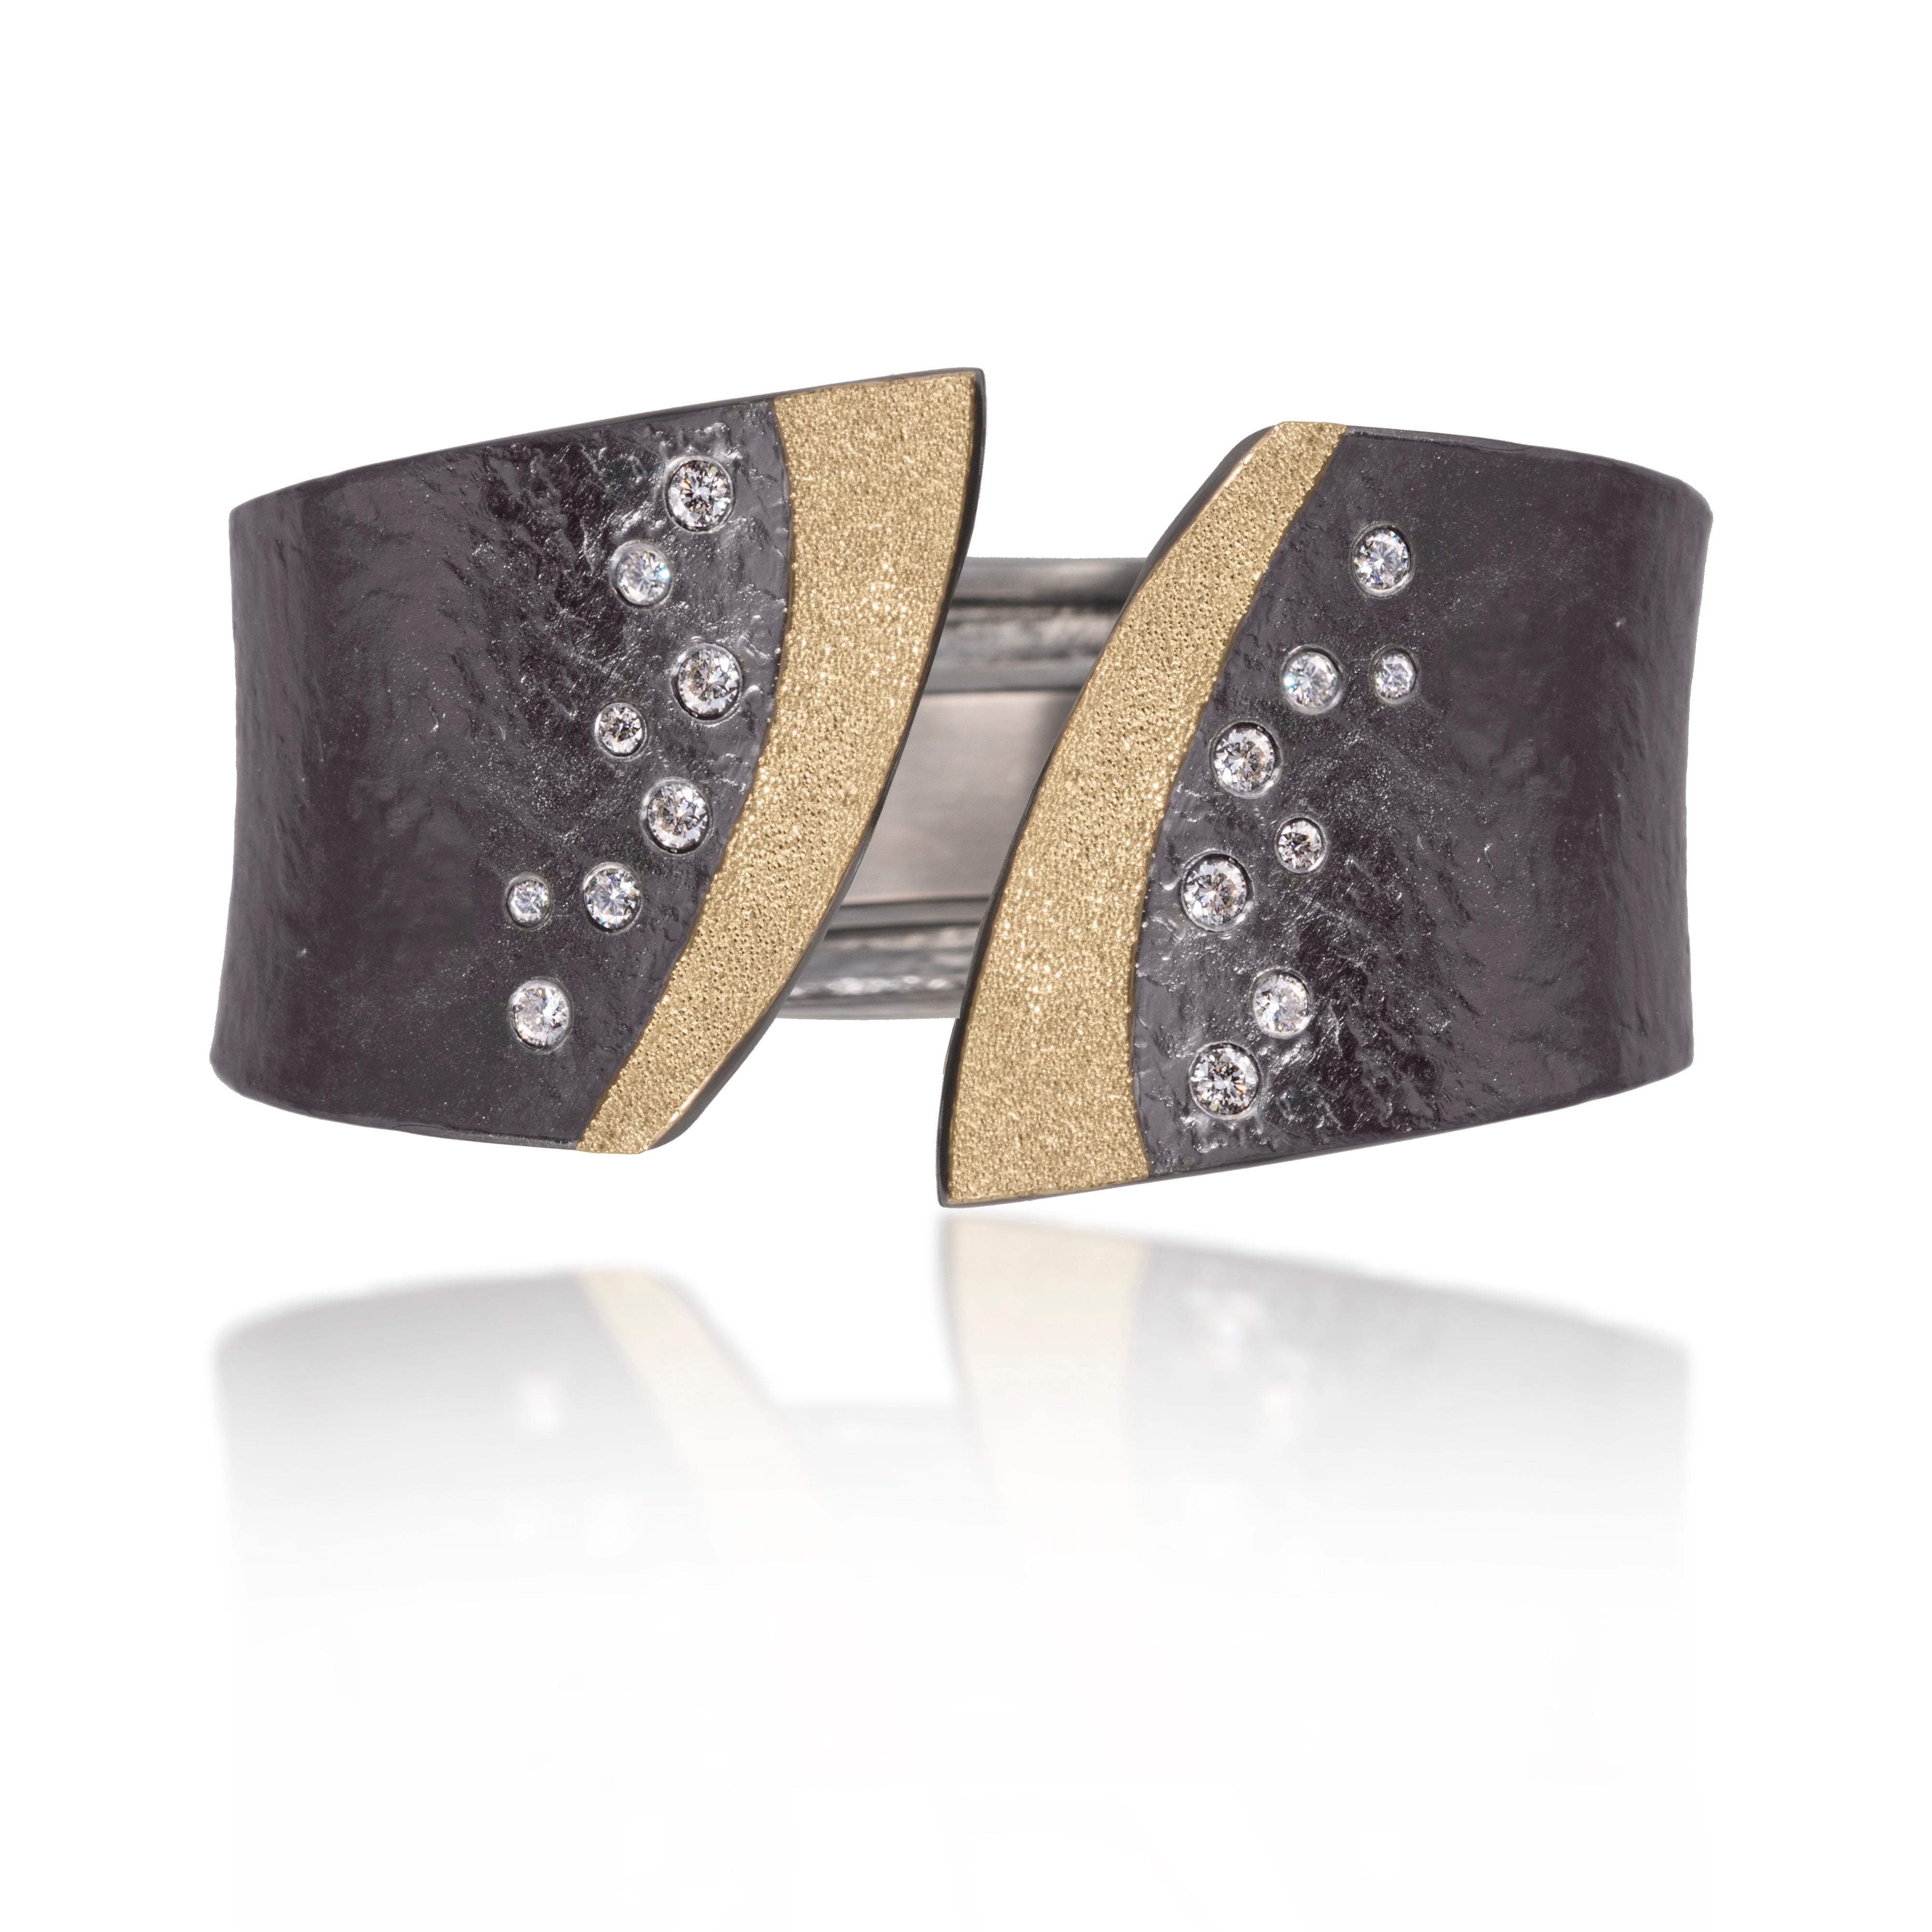 This striking Cyclone Cuff in 18k gold and oxidized sterling silver is flush set with assorted diamonds. A hinge on the back side of this tapered cuff allows it to fully open, making it incredibly easy to put on and off with one hand. Symmetric bypass style, hand fabricated, with a spring steel hinge and hammered textured. Available with white or gray diamonds. As shown, 0.59 tcw.